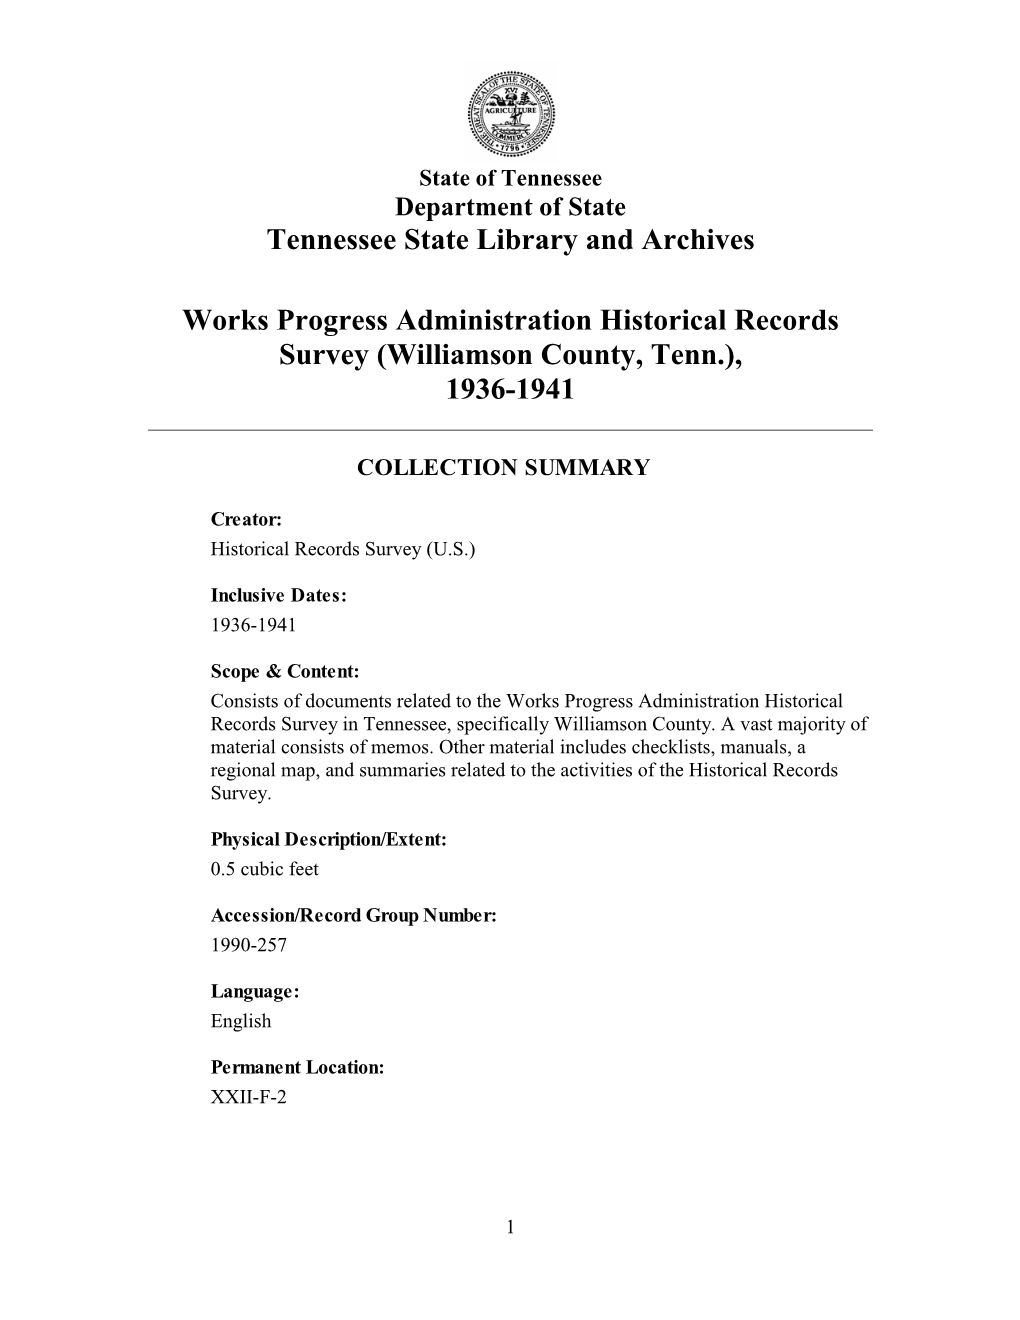 Tennessee State Library and Archives Works Progress Administration